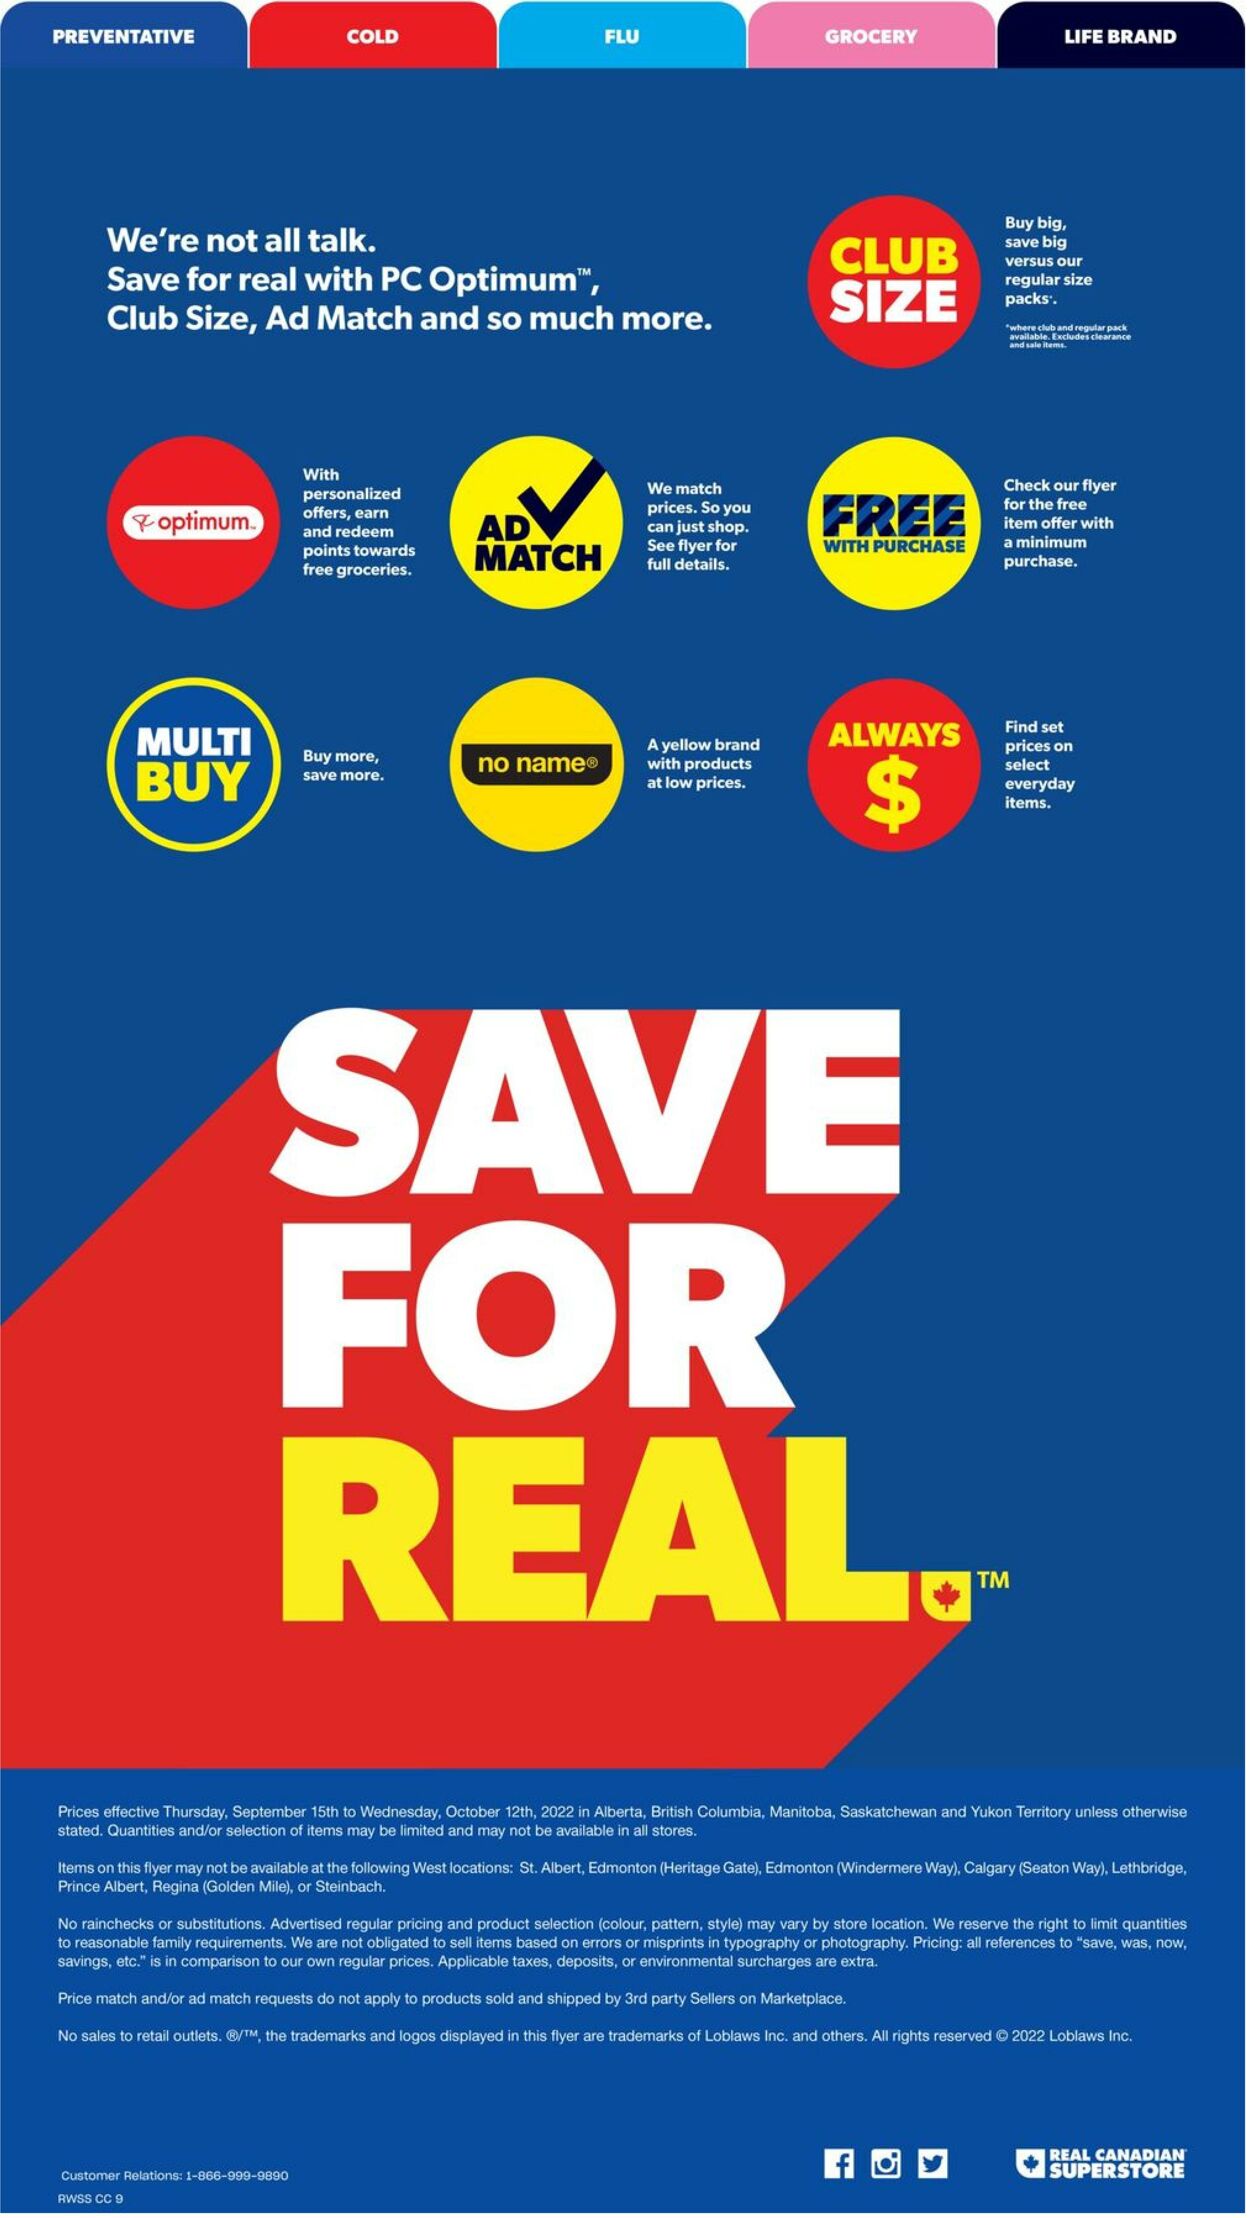 Flyer Real Canadian Superstore 15.09.2022 - 12.10.2022